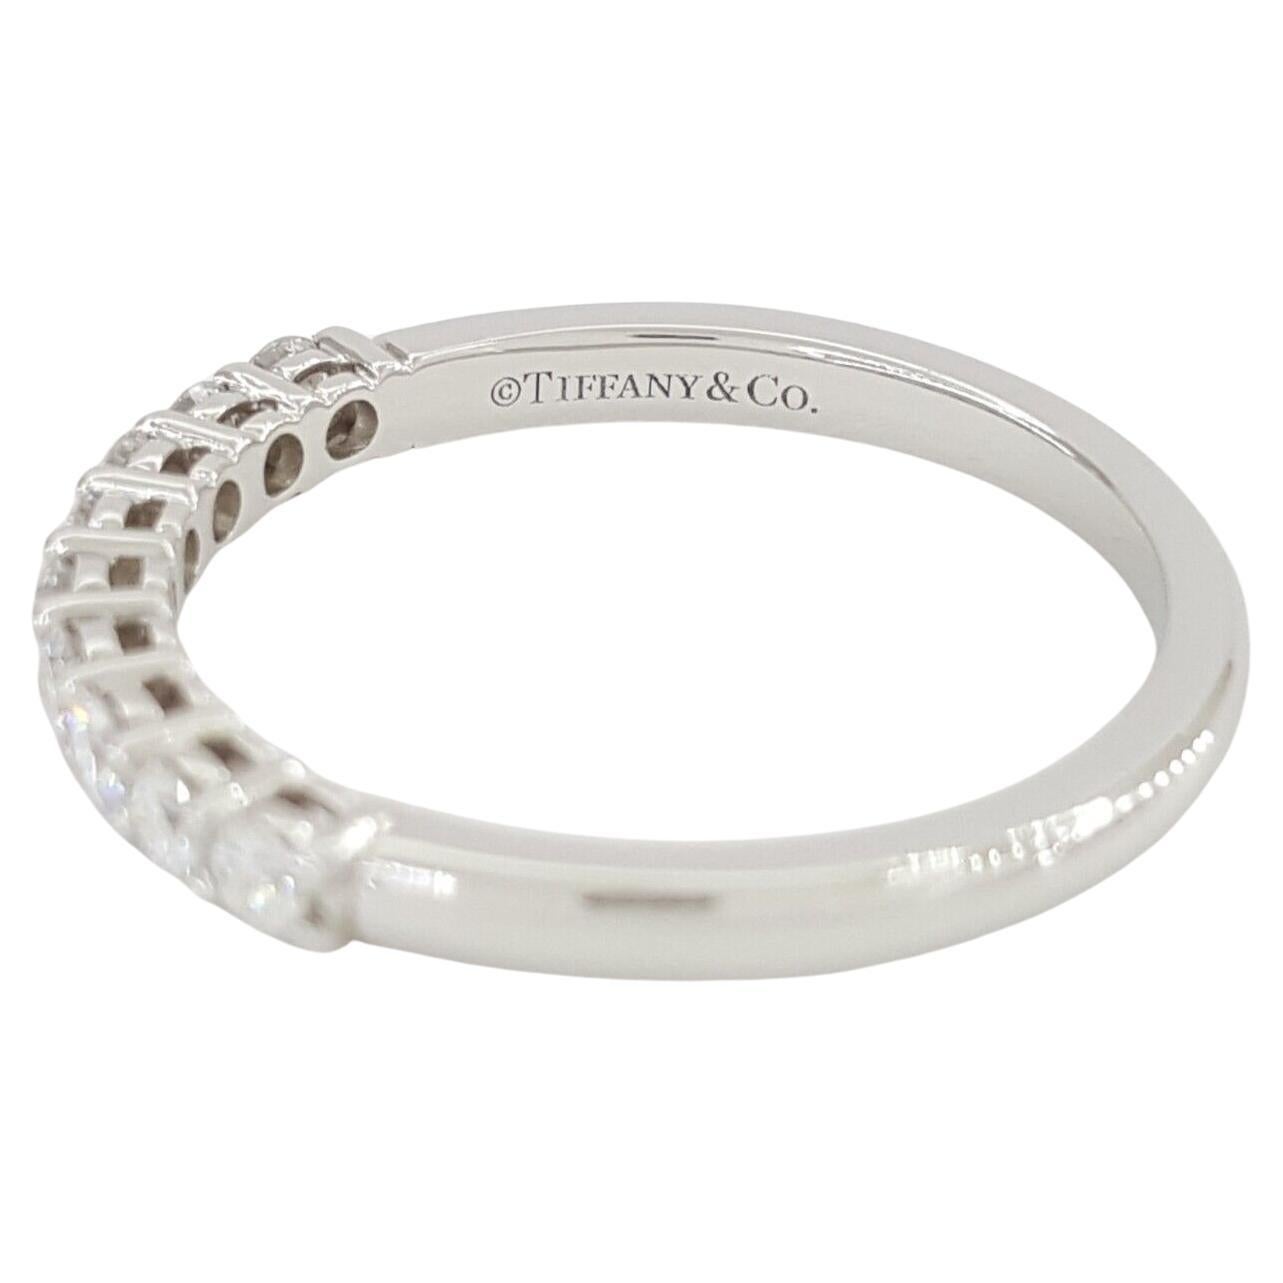 Tiffany & Co Forever Platinum Half Circle Wedding/Anniversary Band/Ring, adorned with a total weight of 0.27 ct Round Brilliant Cut Diamonds.

Crafted with precision and authenticity, this exquisite ring weighs 2.6 grams and is sized at 6.25, with